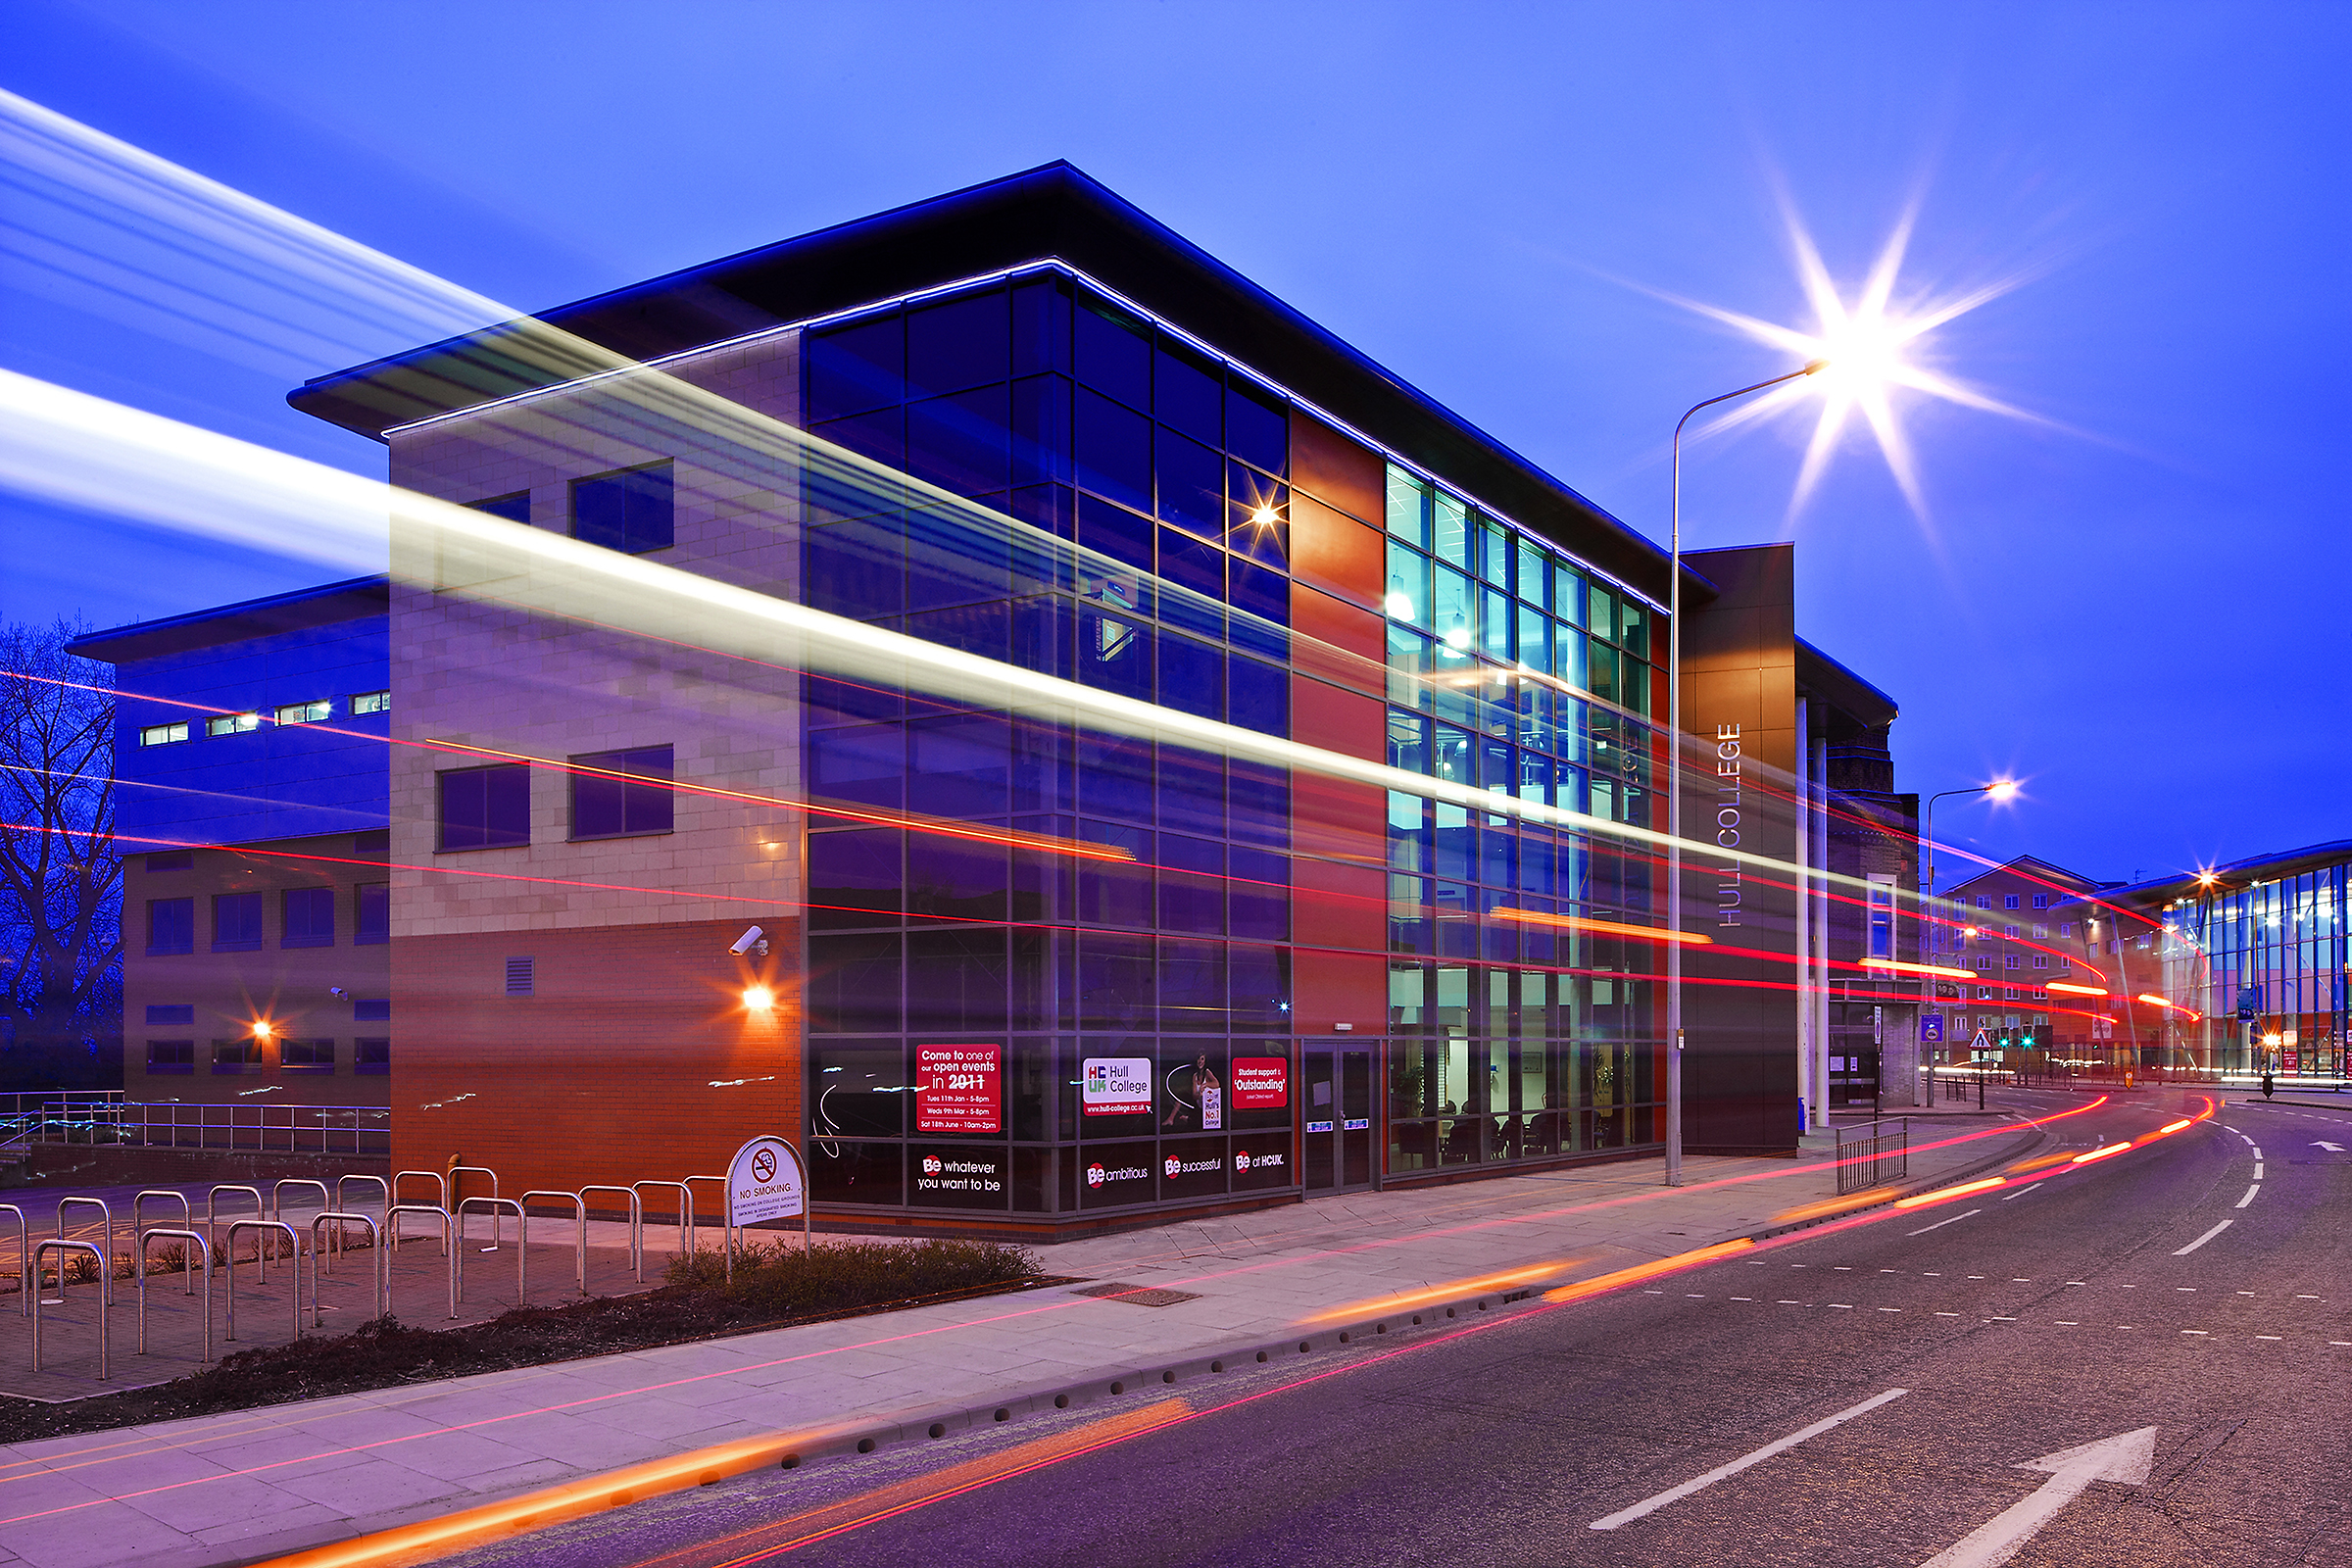 Creative Architectural photograph of a college building at dusk in East Yorkshire.